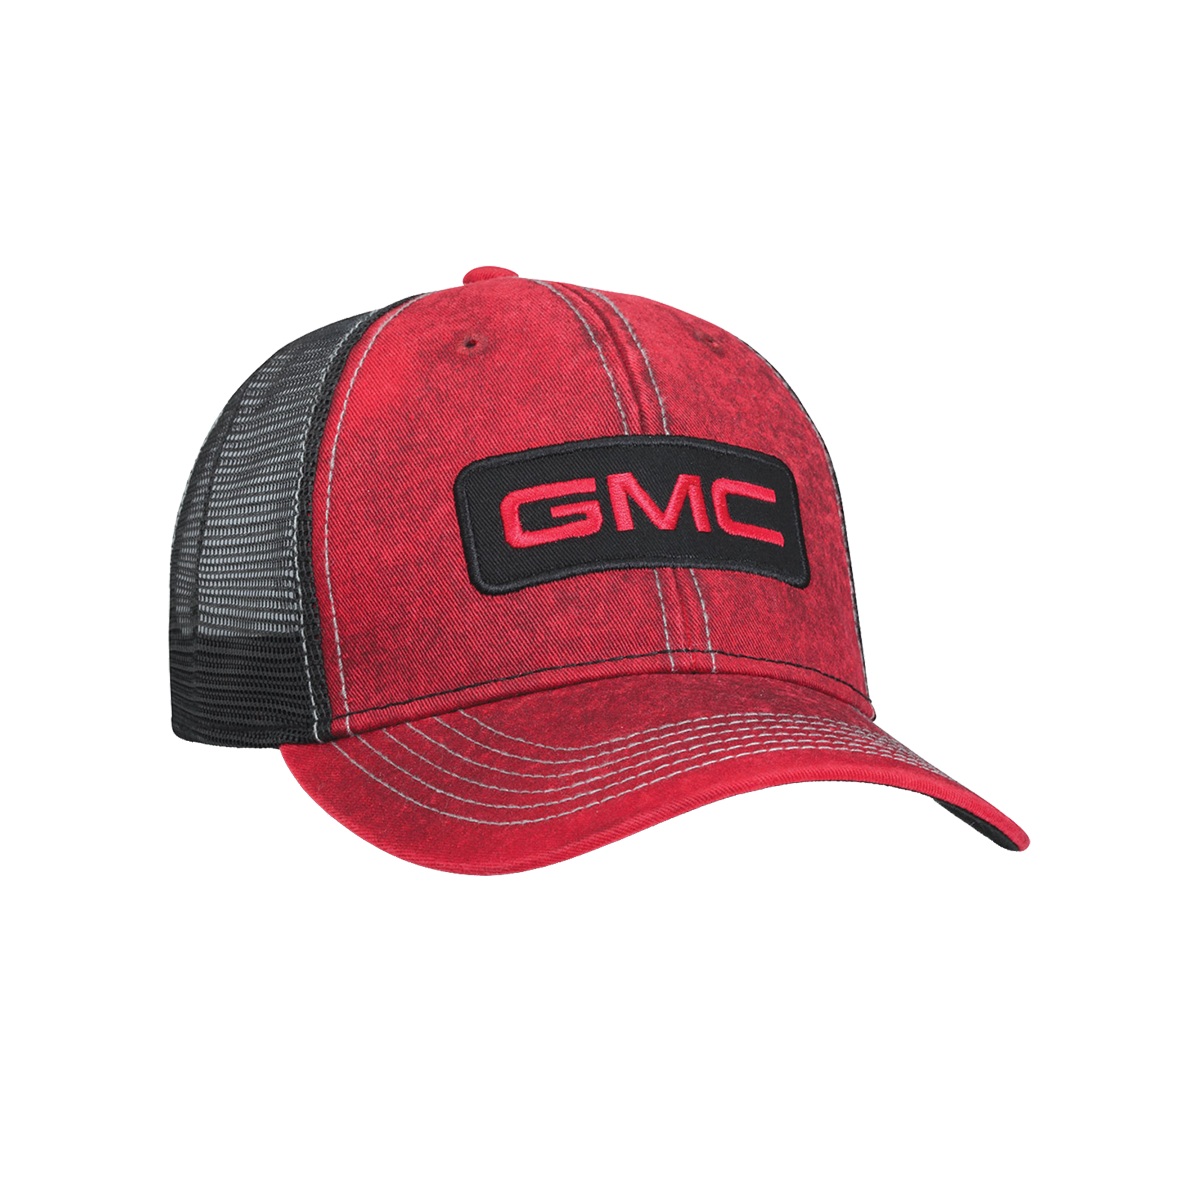 GMC Red Washed Cap